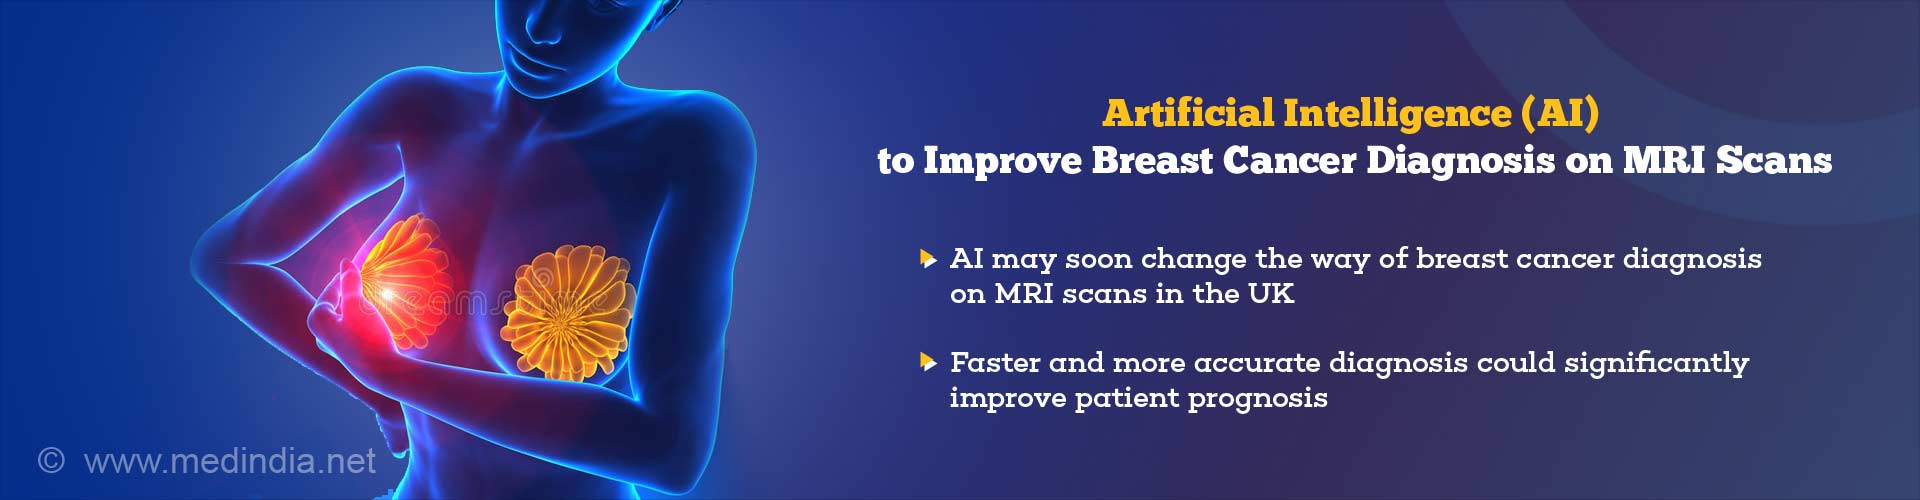 artificial intelligence (ai) to improve breast cancer diagnosis on mri scans
- ai may soon change the way of breast cancer diagnosis on mri scans in the UK
- faster and more accurate diagnosis could significantly improve patient prognosis